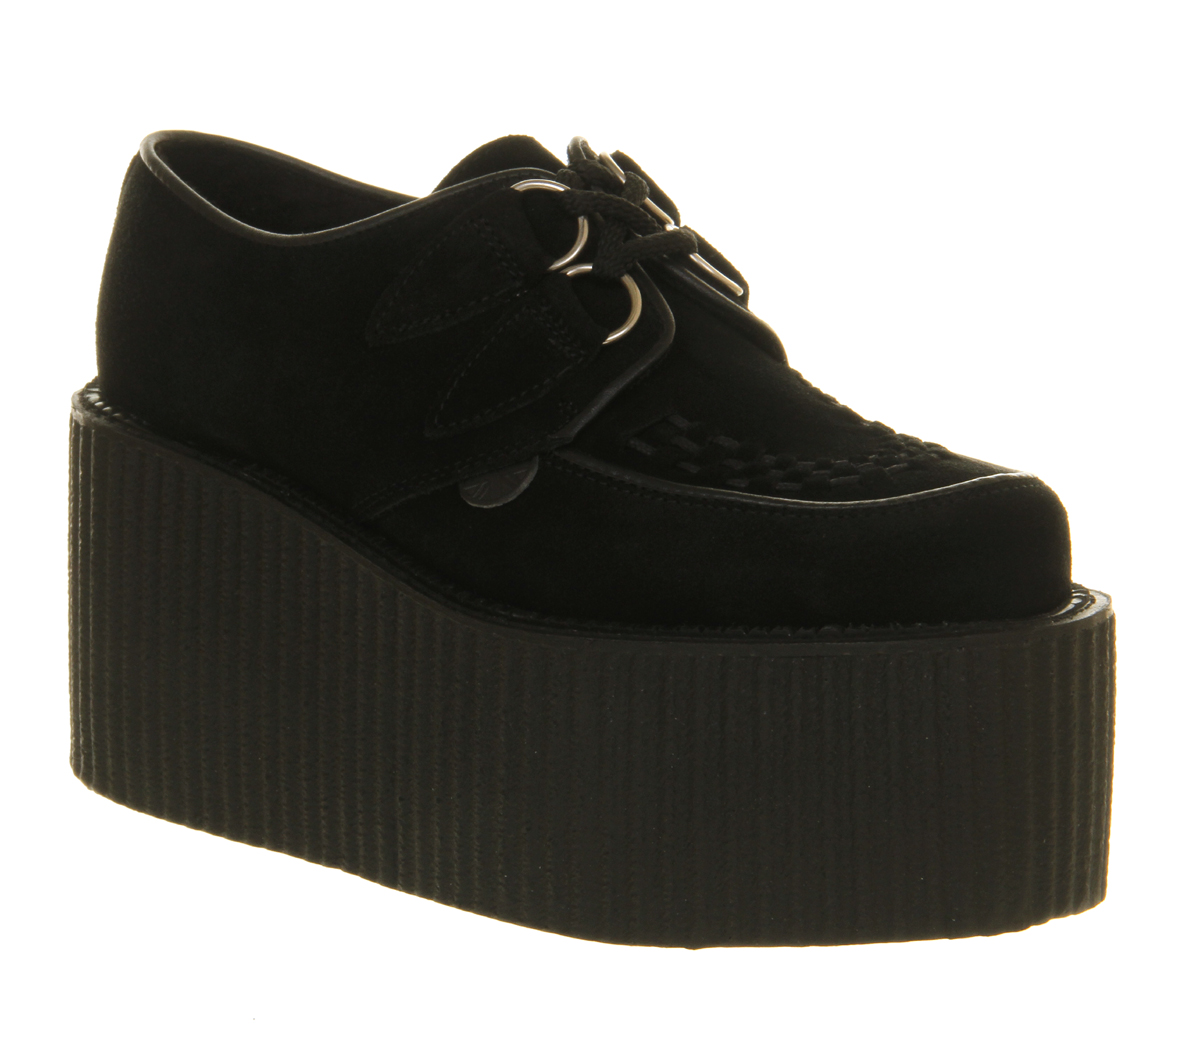 Underground Triple Sole Creeper Black Suede - Flat Shoes for Women